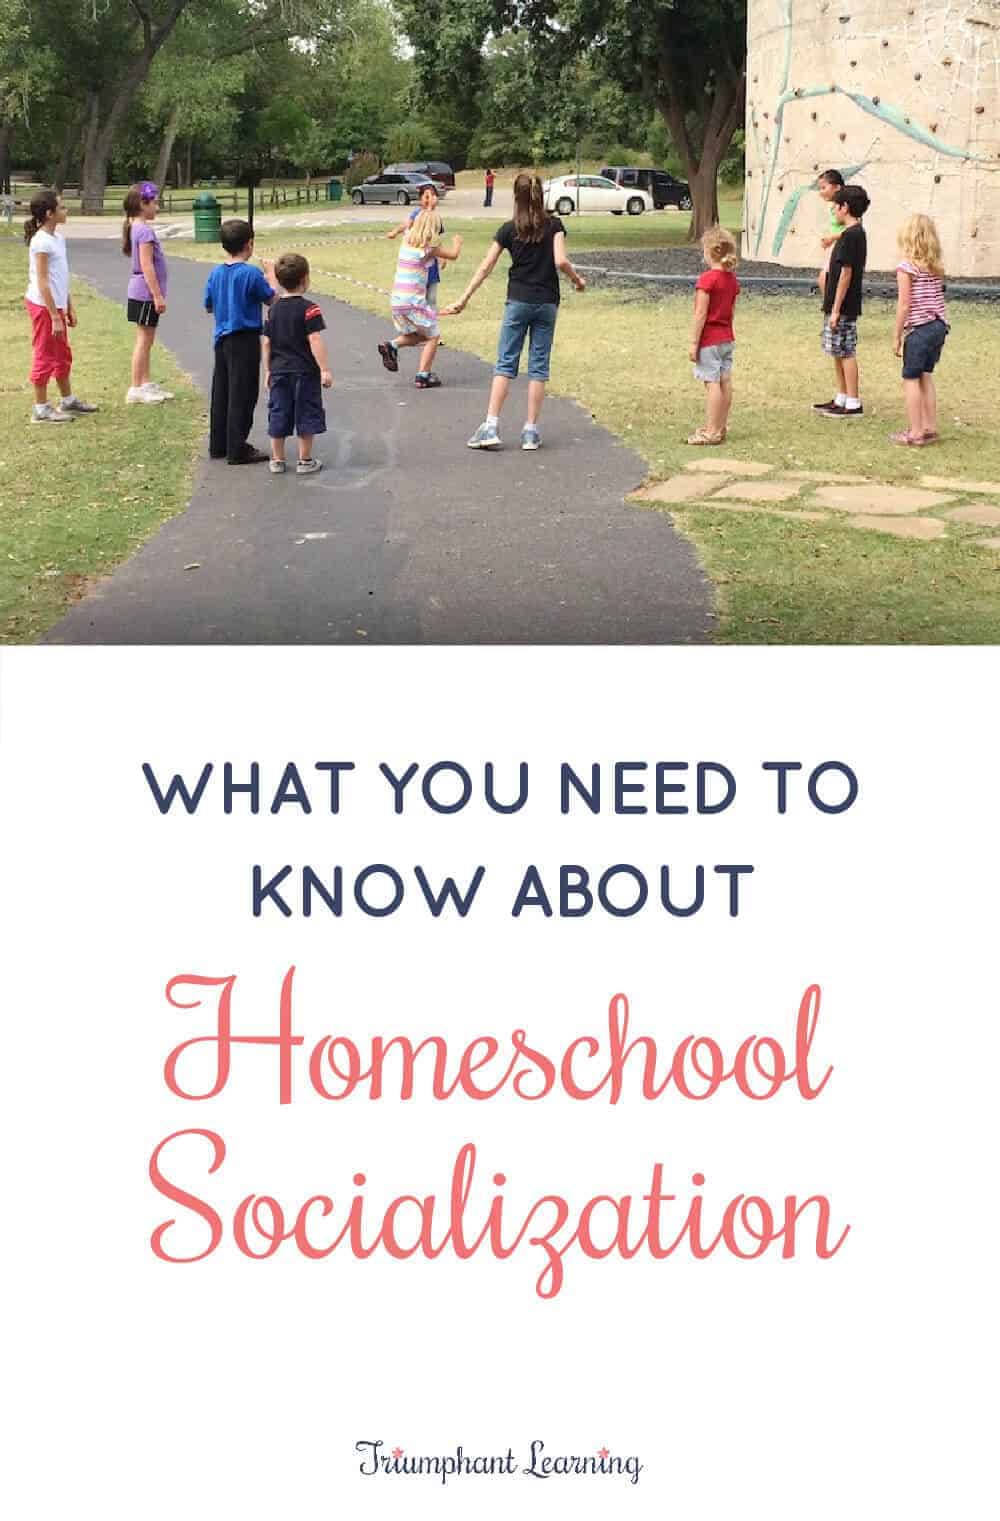 Learn about the benefits and challenges of homeschool socialization and ways you can create your social network as a homeschool family. via @TriLearning